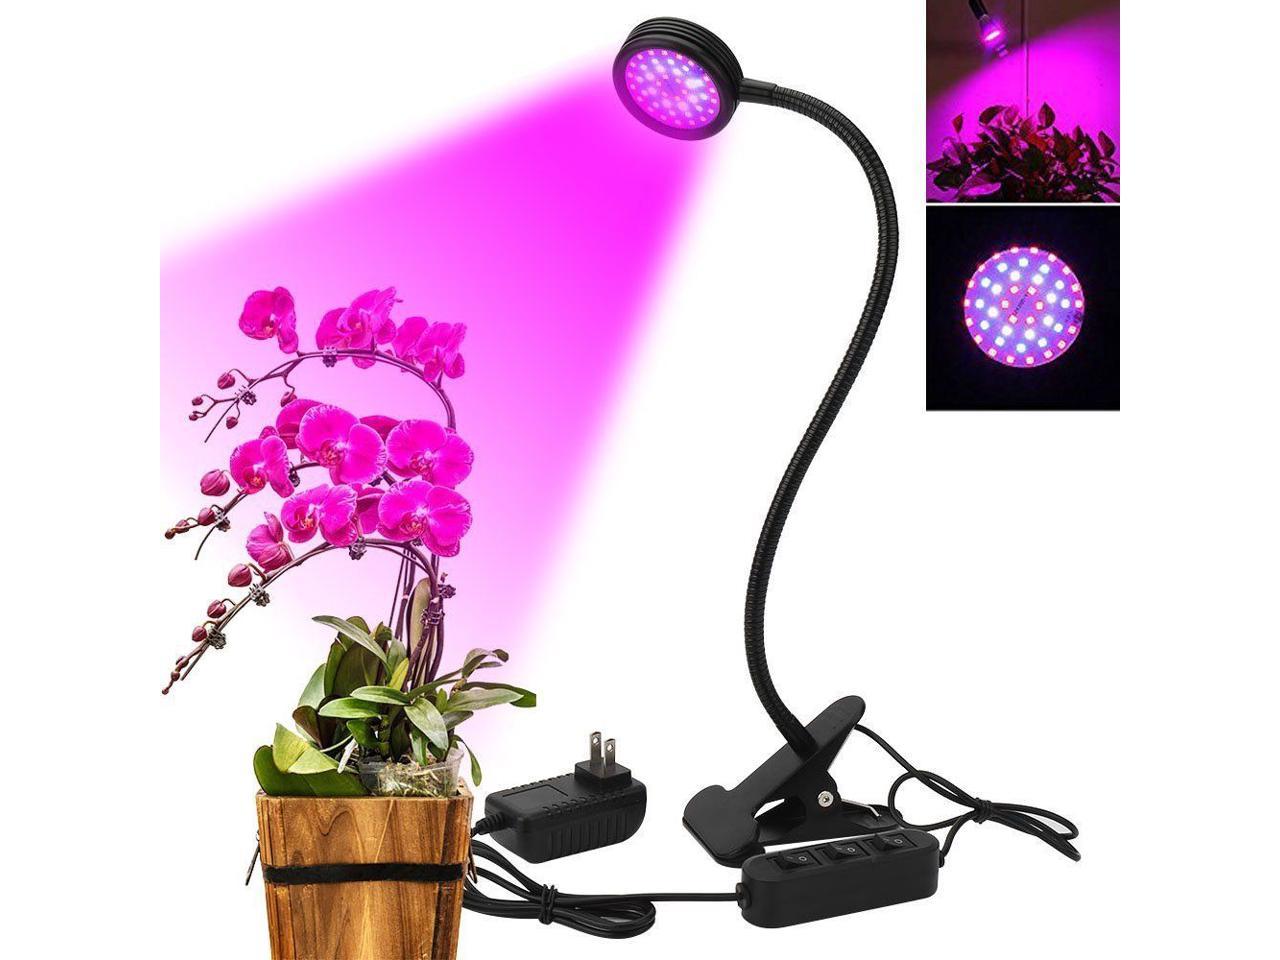 Details about   72 LED Indoor Plant Grow Light Bulb Growth Lamp Red blue light Hydro desk holder